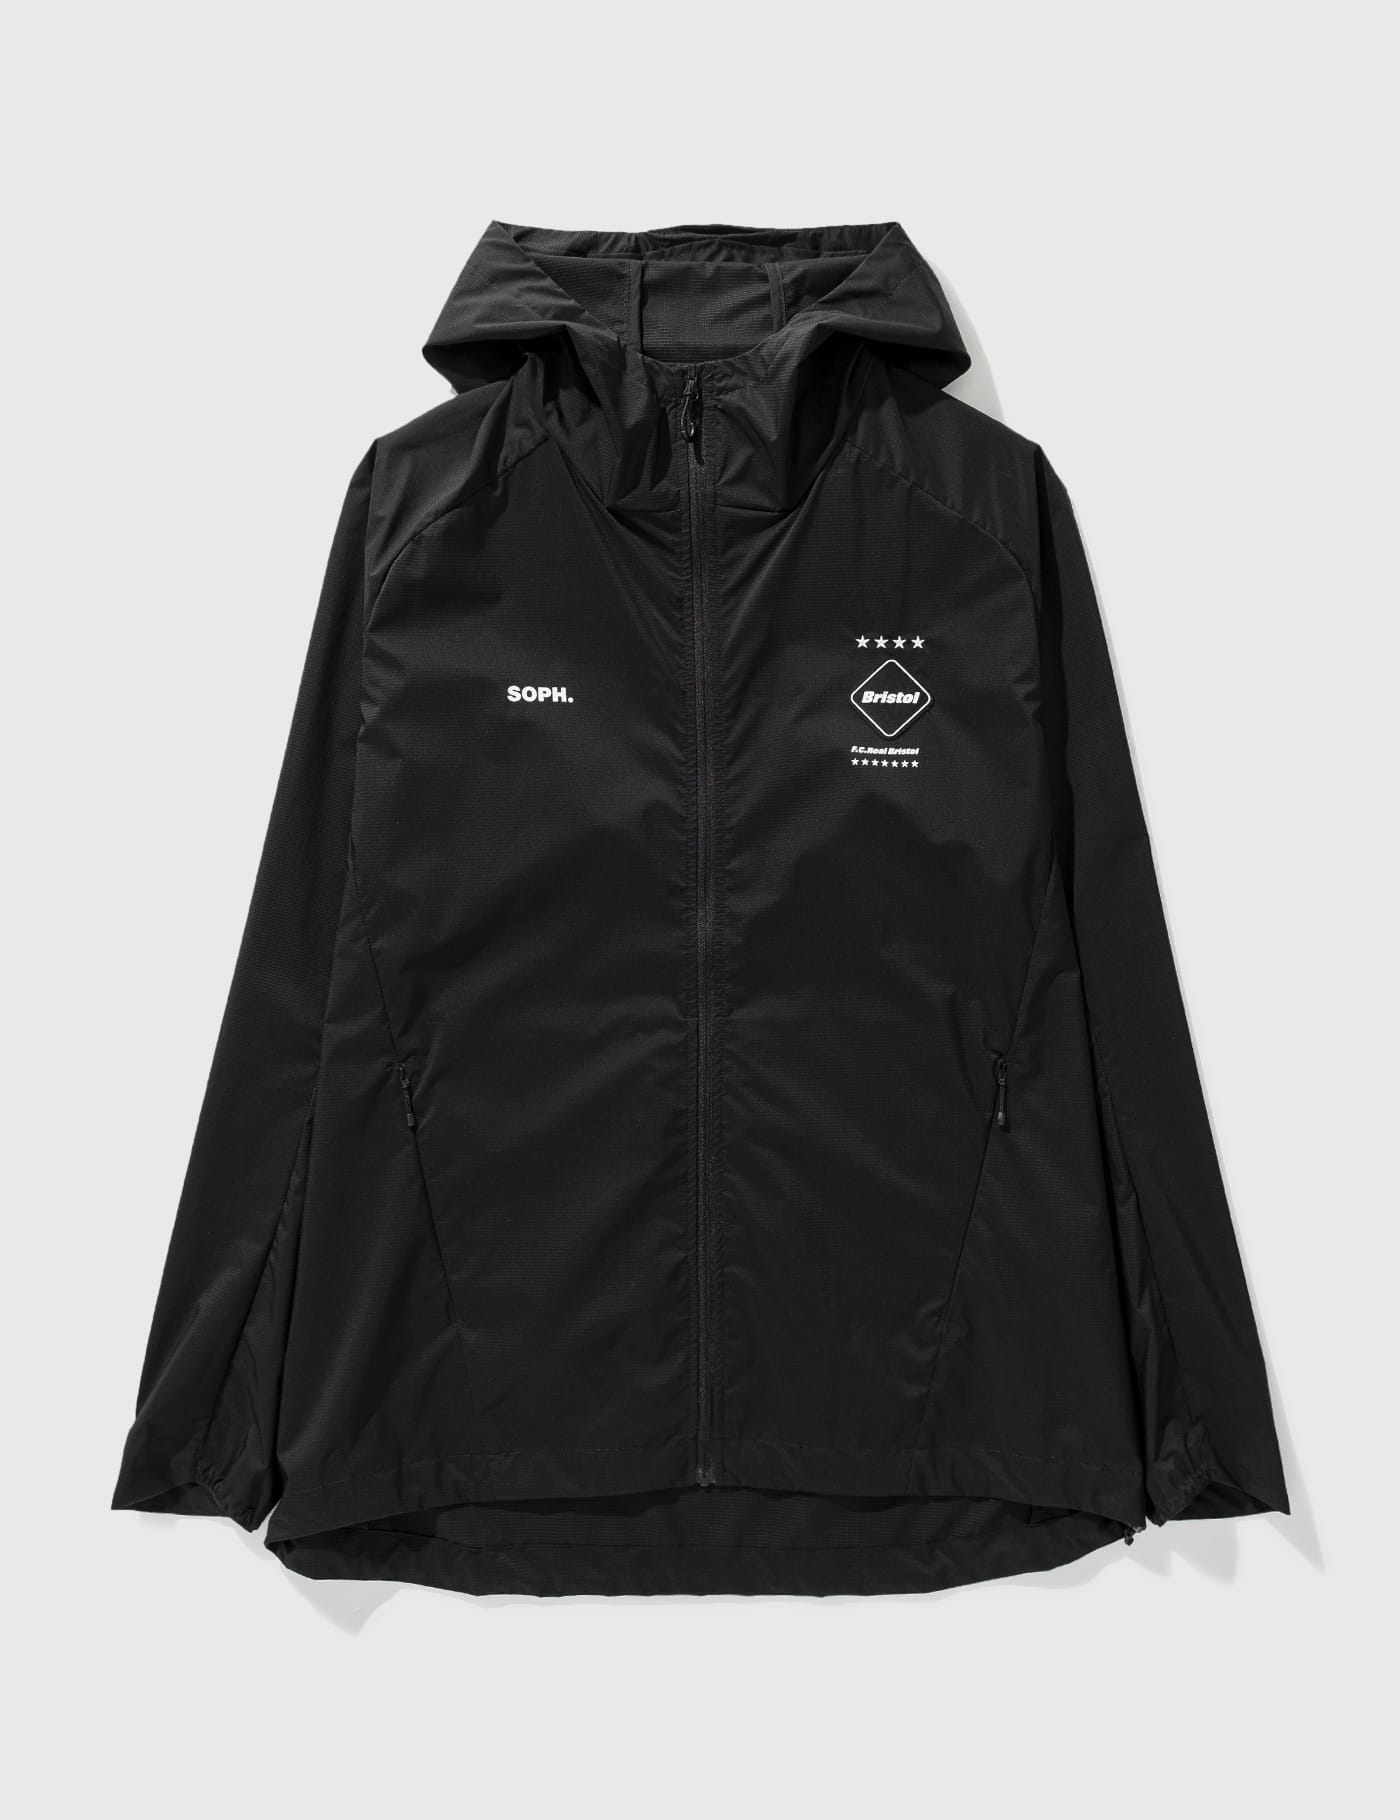 FCRB ULTRA LIGHT L WEIGHT UTILITY JACKET